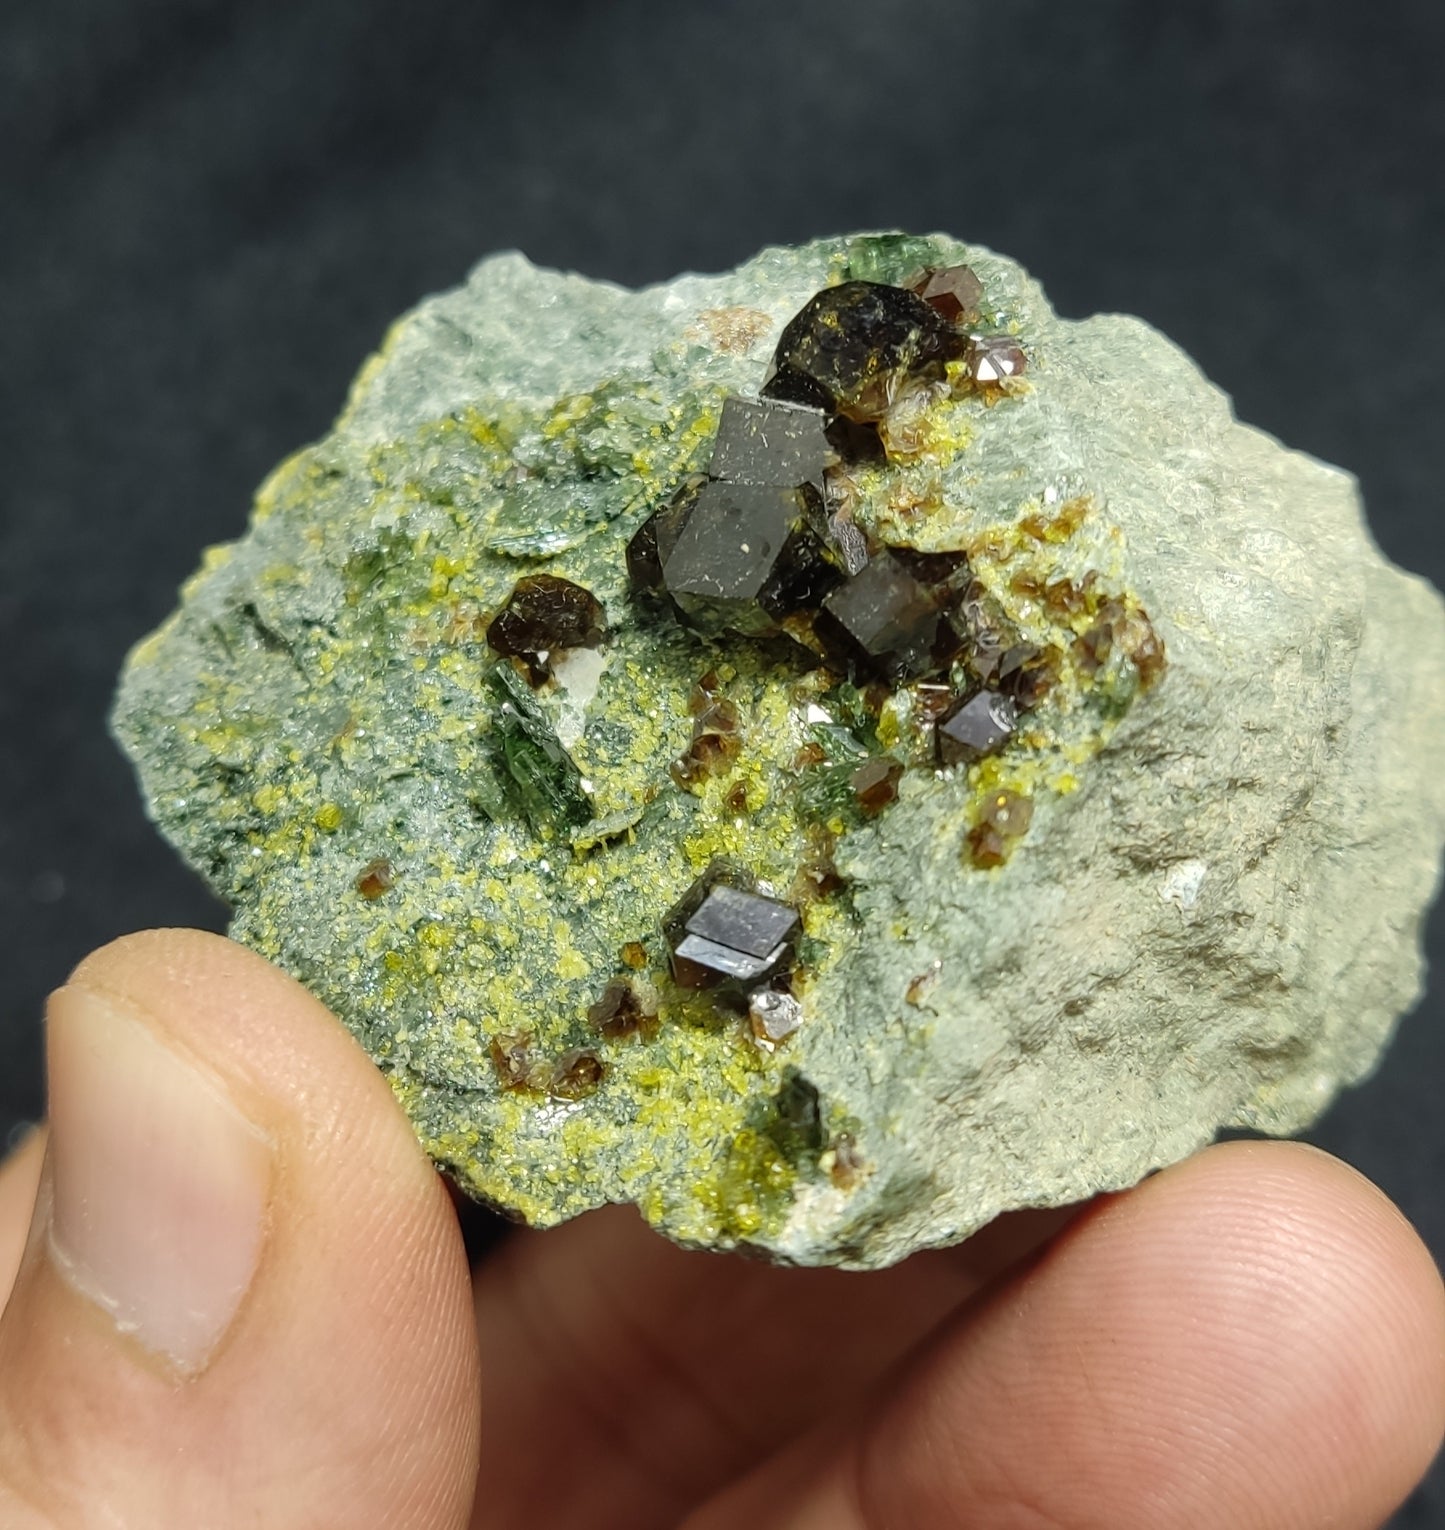 Andradite garnets on matrix with diopside and epidote 128 grams